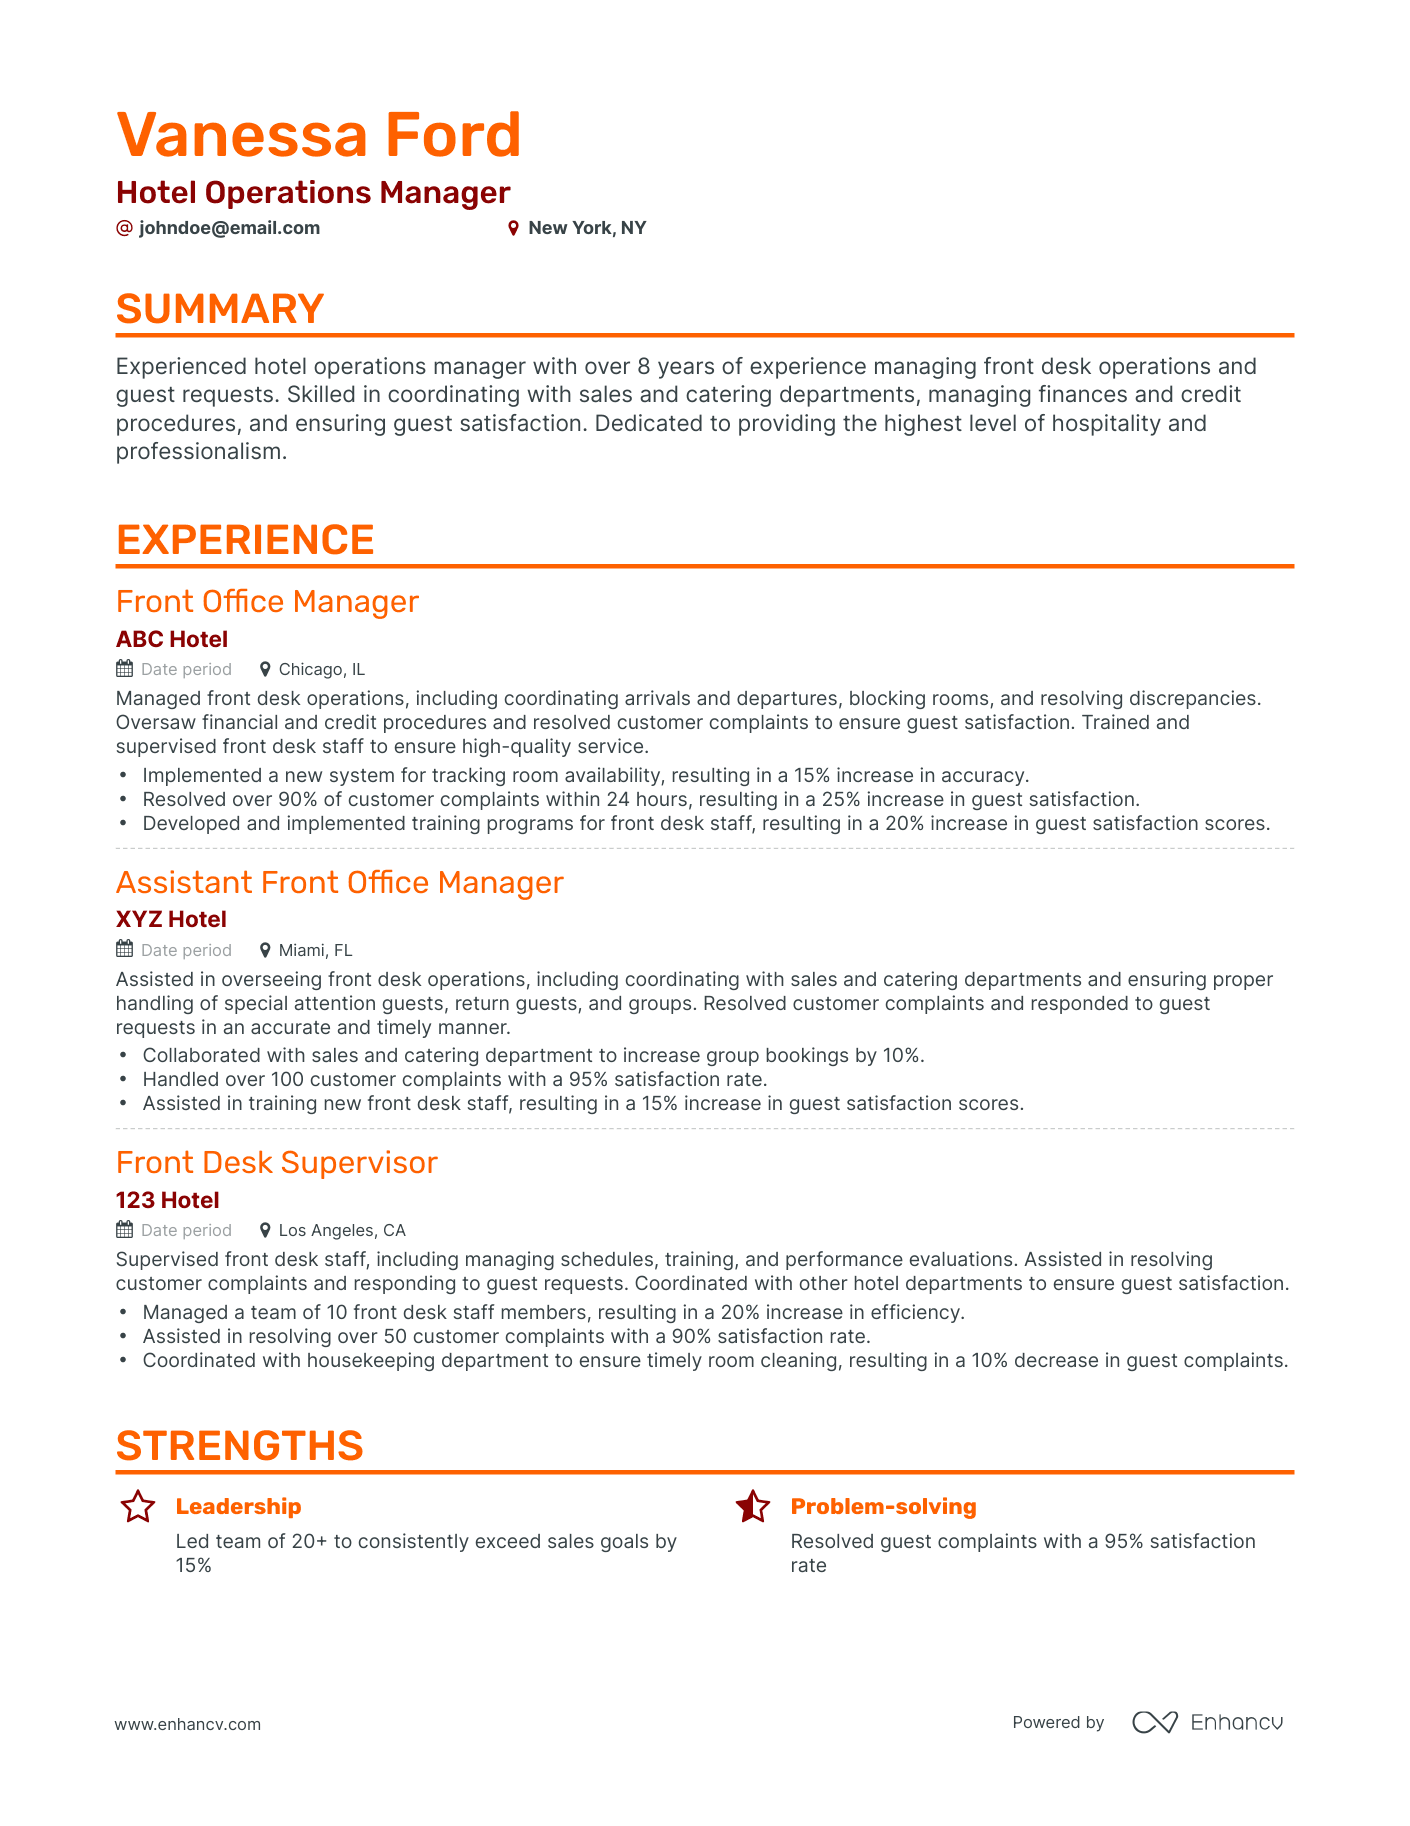 Classic Hotel Operations Manager Resume Template